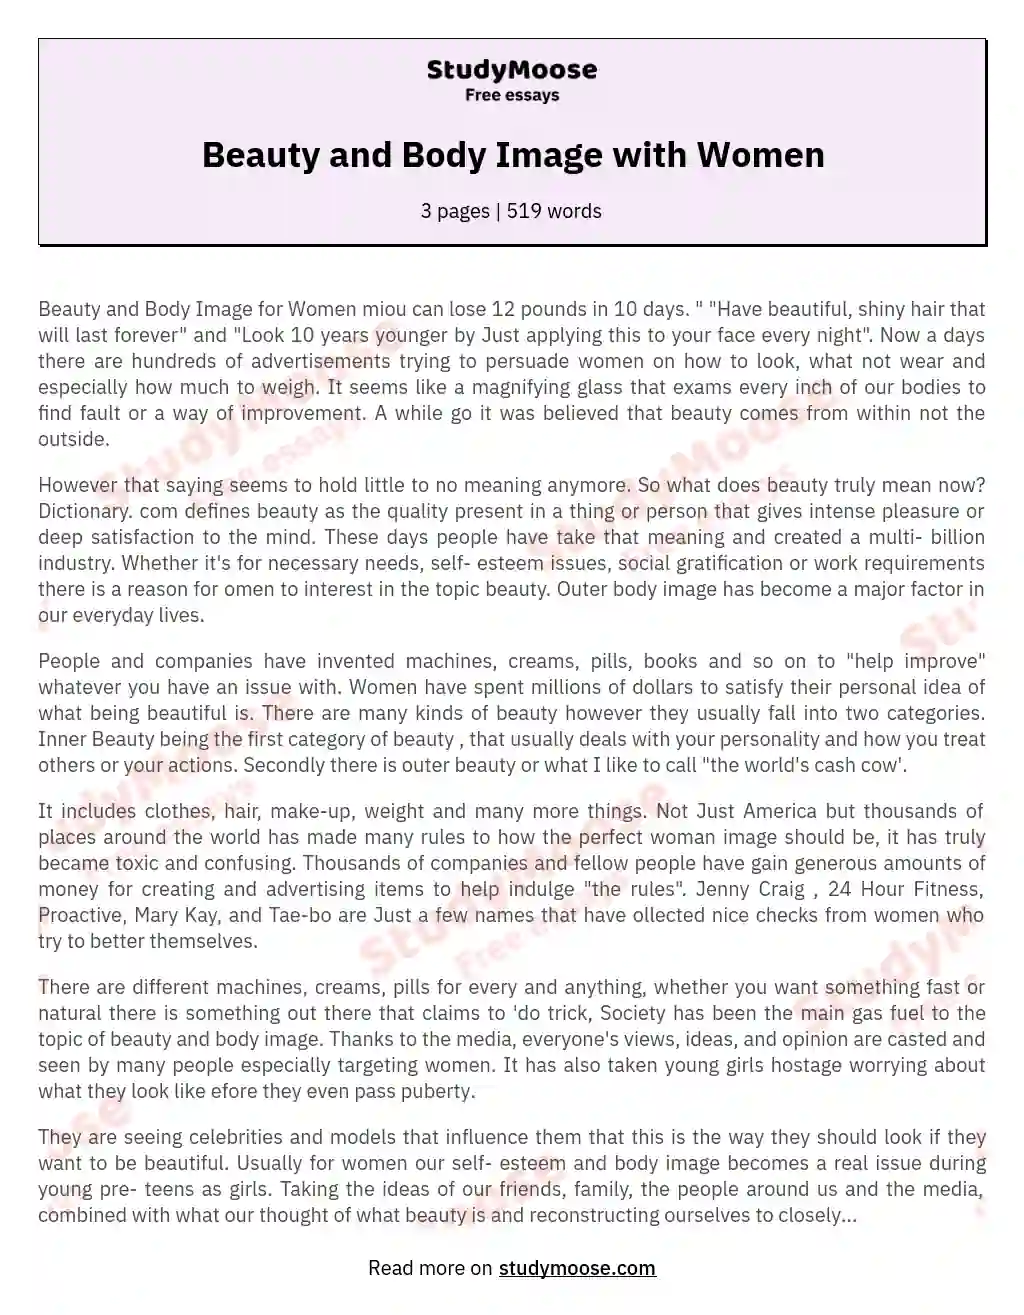 Beauty and Body Image with Women essay